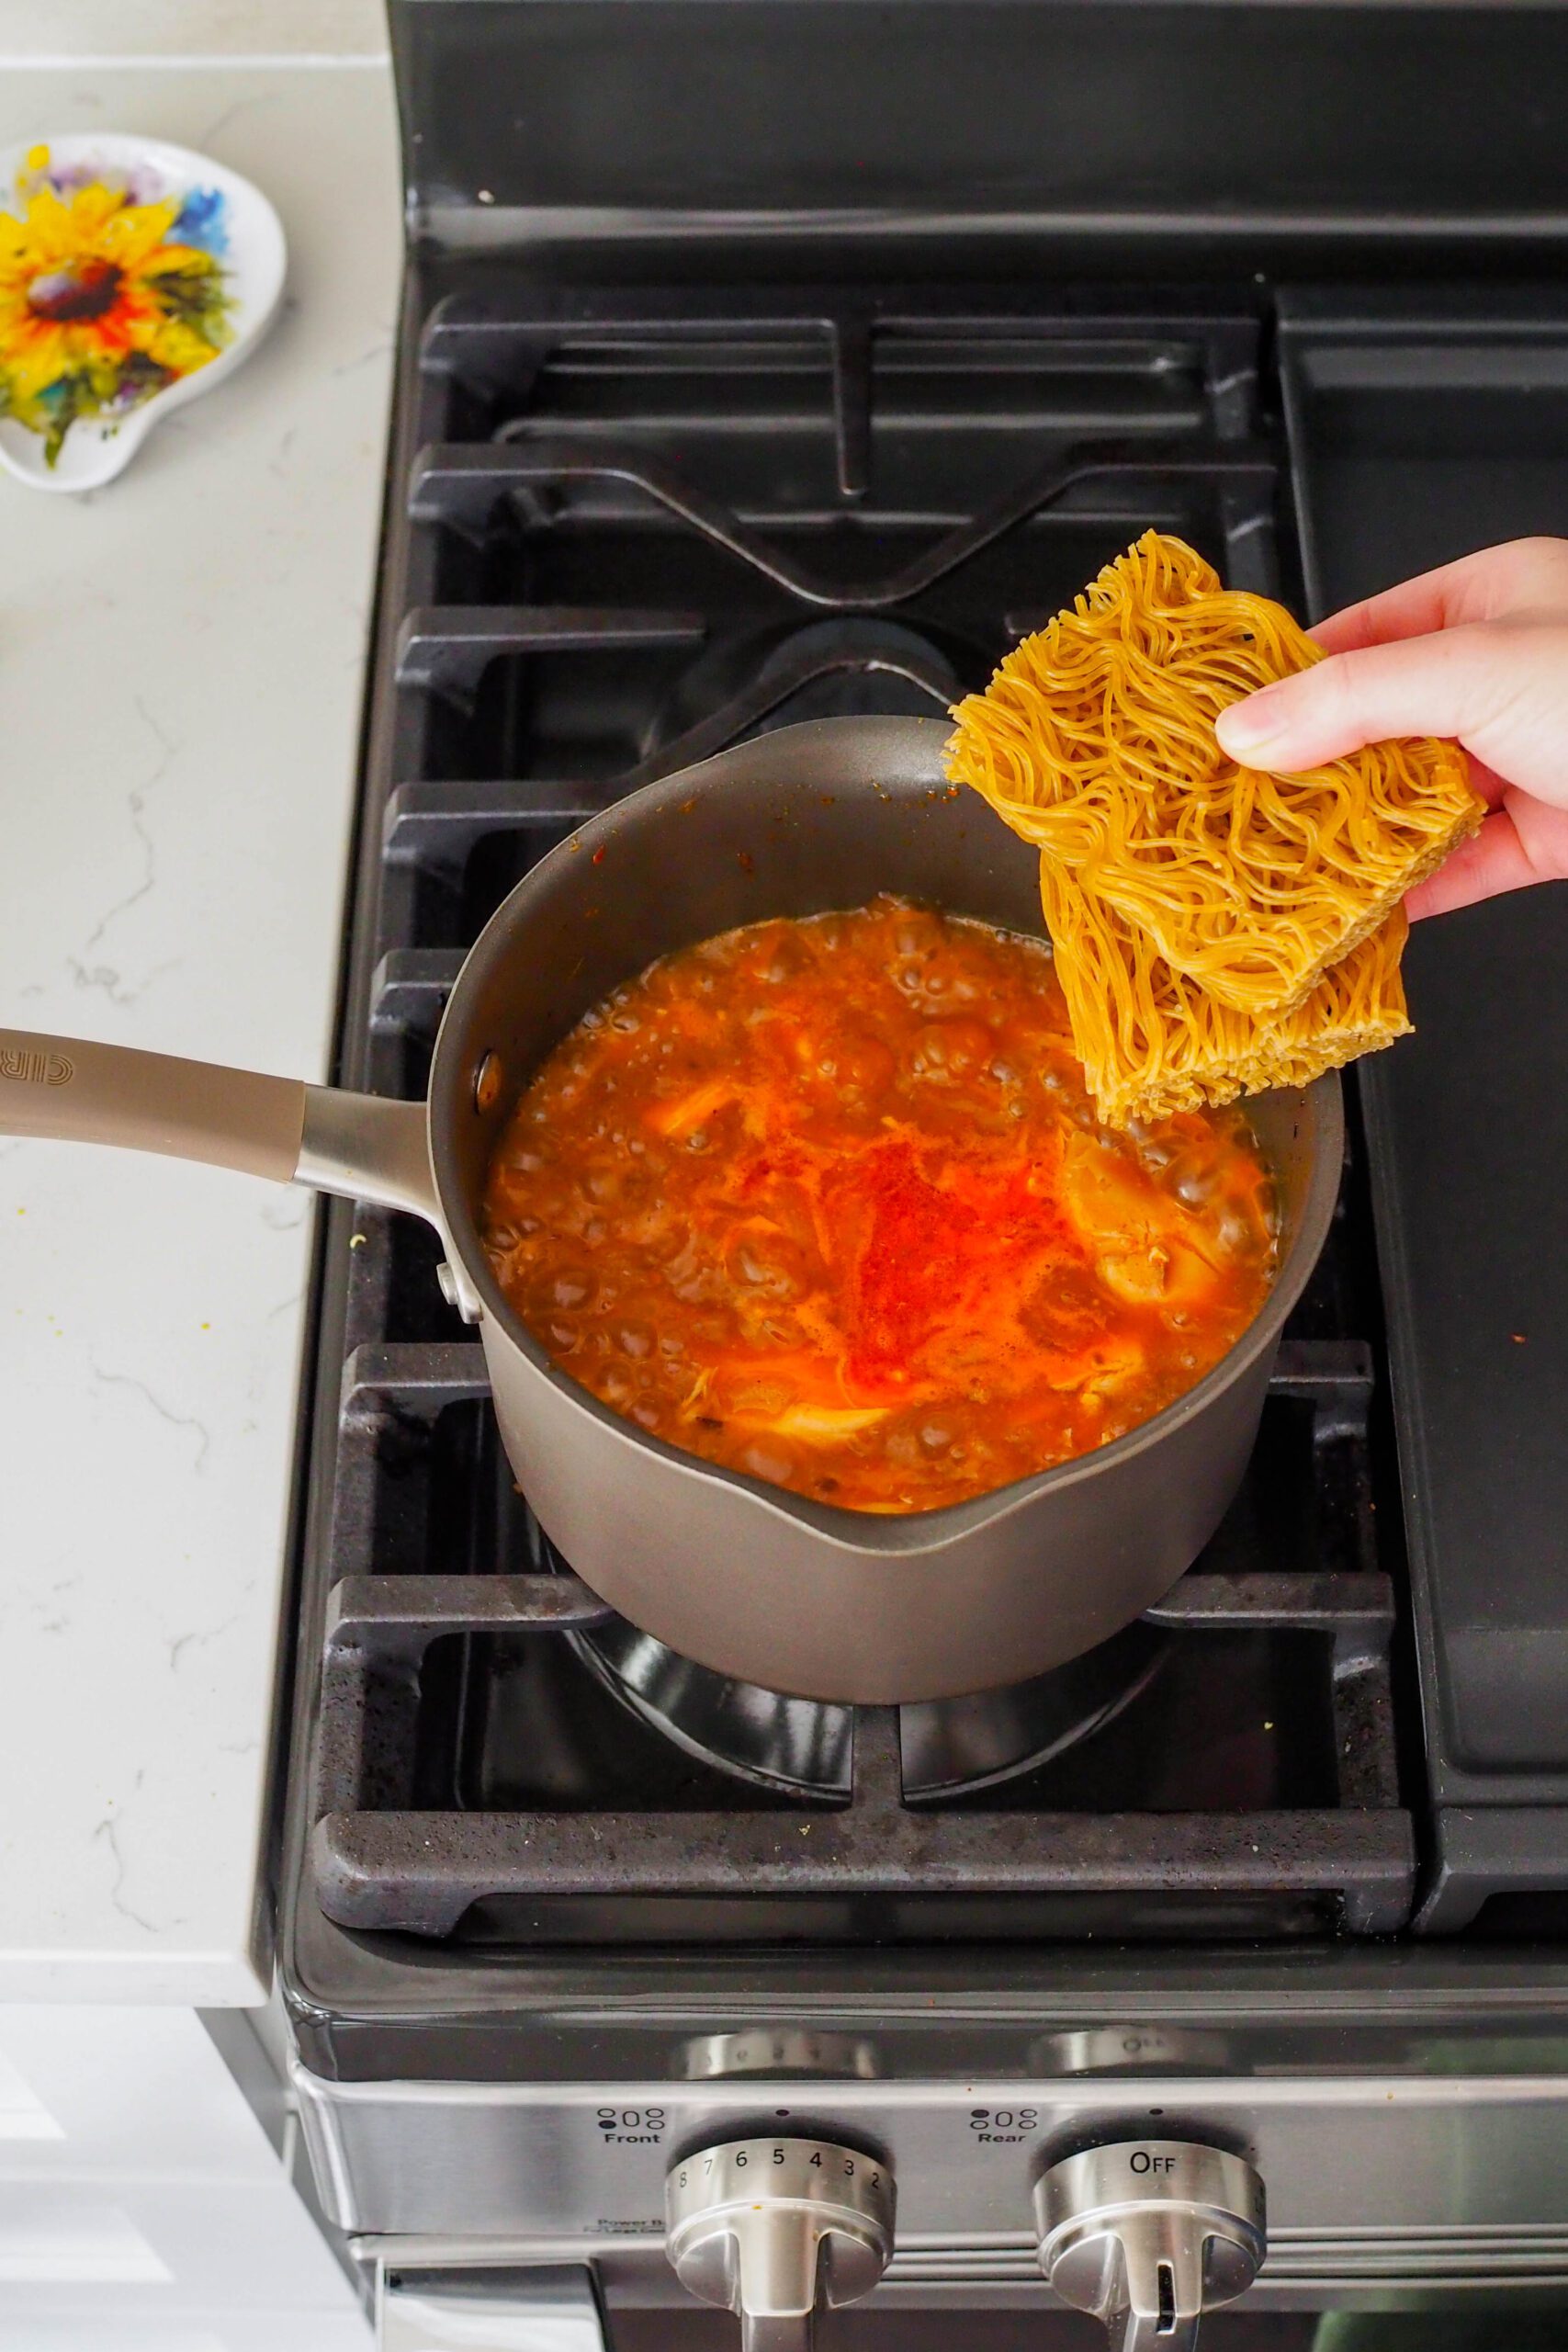 A hand places two cakes of dried ramen noodles into ramen broth.